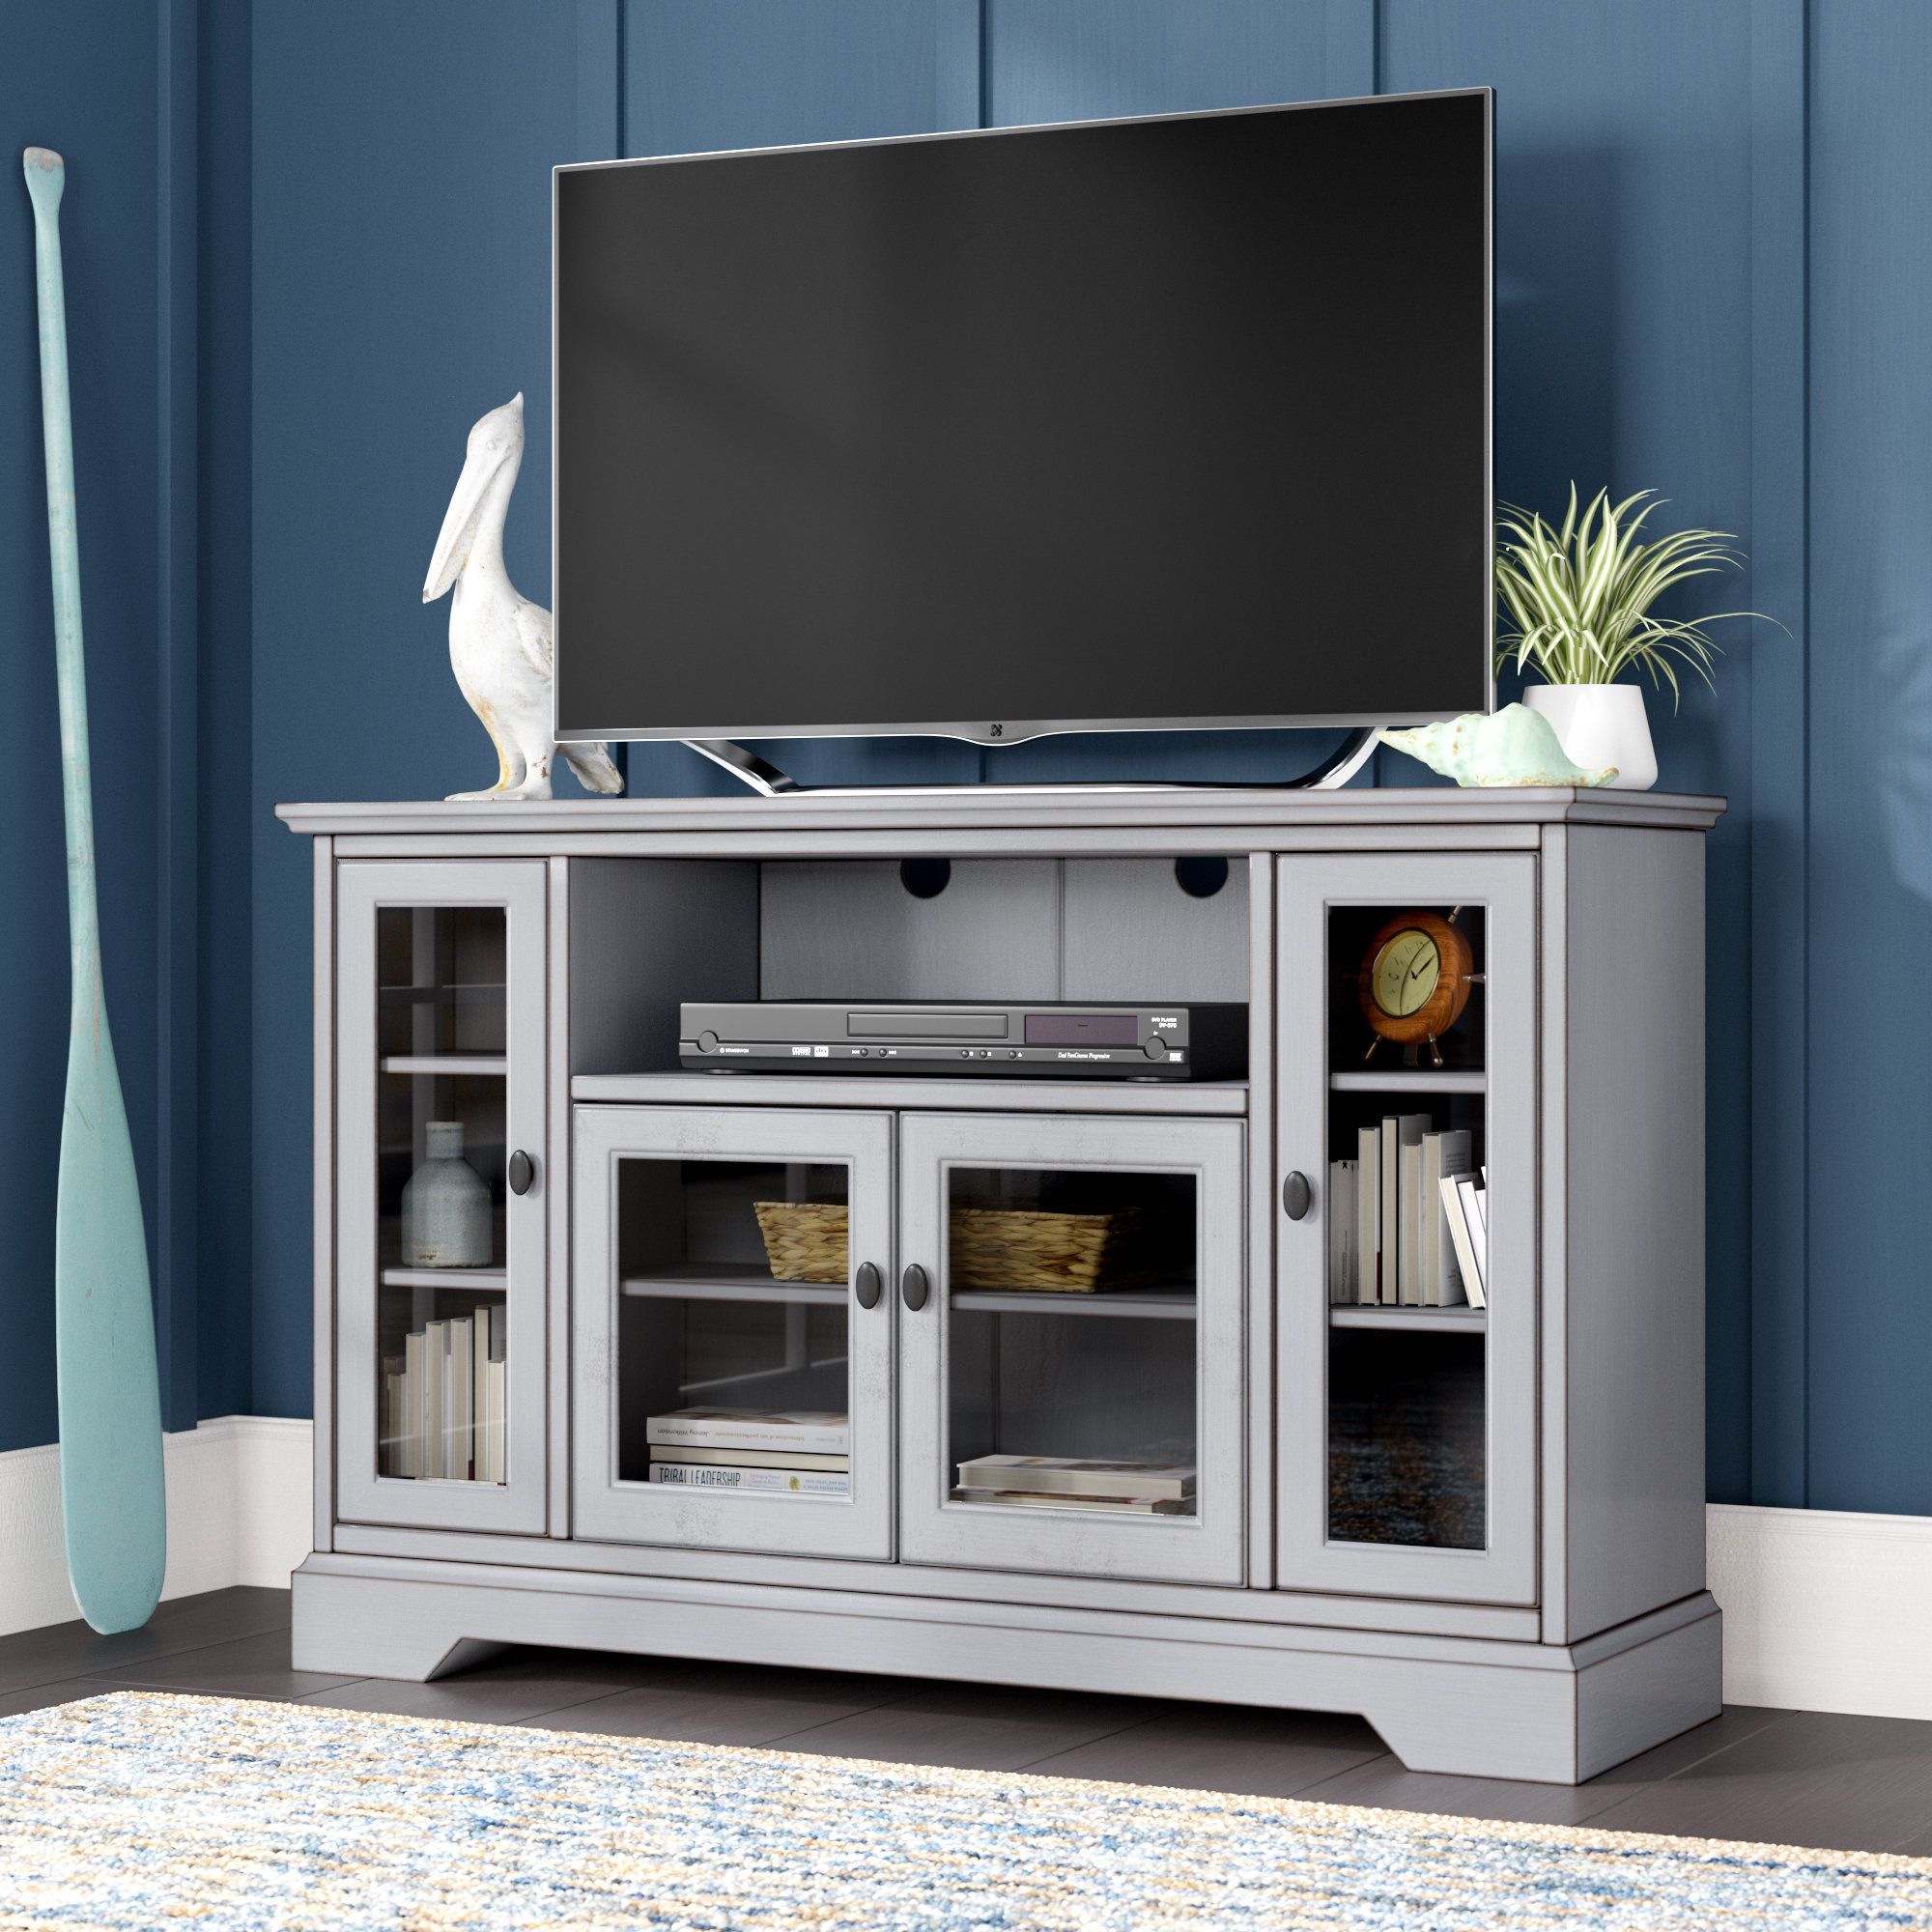 Tv Stands & Entertainment Centers You'll Love | Wayfair With Regard To Ducar 84 Inch Tv Stands (View 30 of 30)